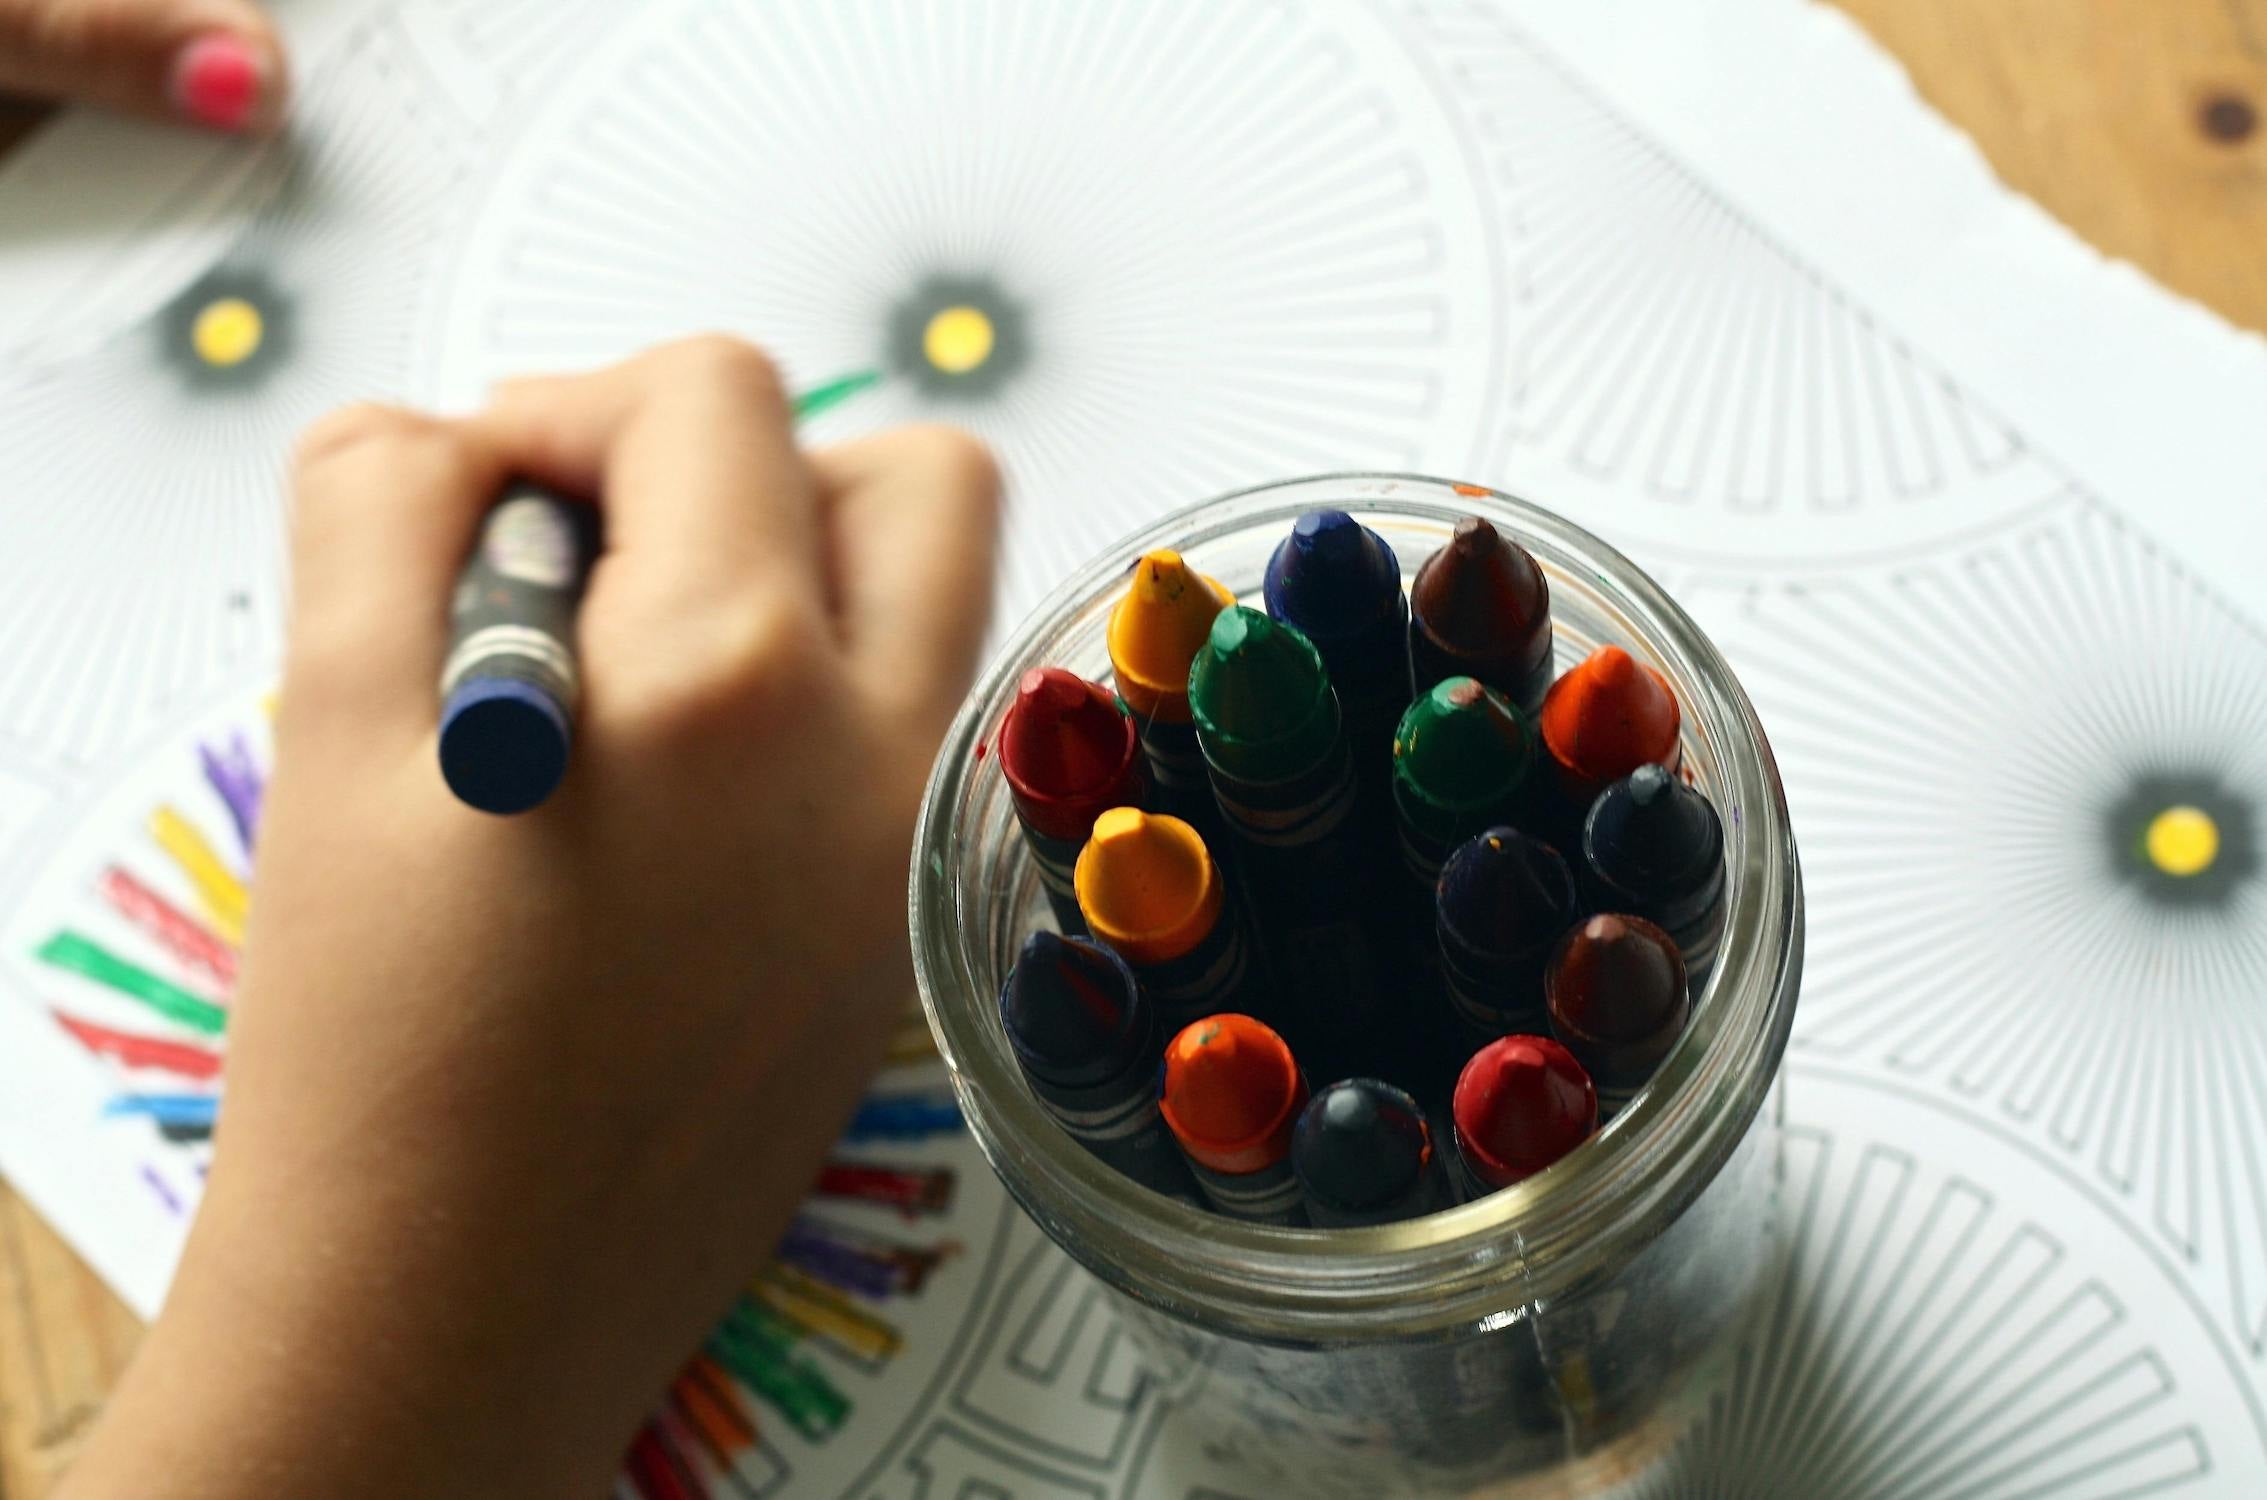 Overhead shot of a child's hand holding a blue crayon, coloring in a detailed mandala design, with a jar full of vibrant crayons in the foreground, on a wooden surface.